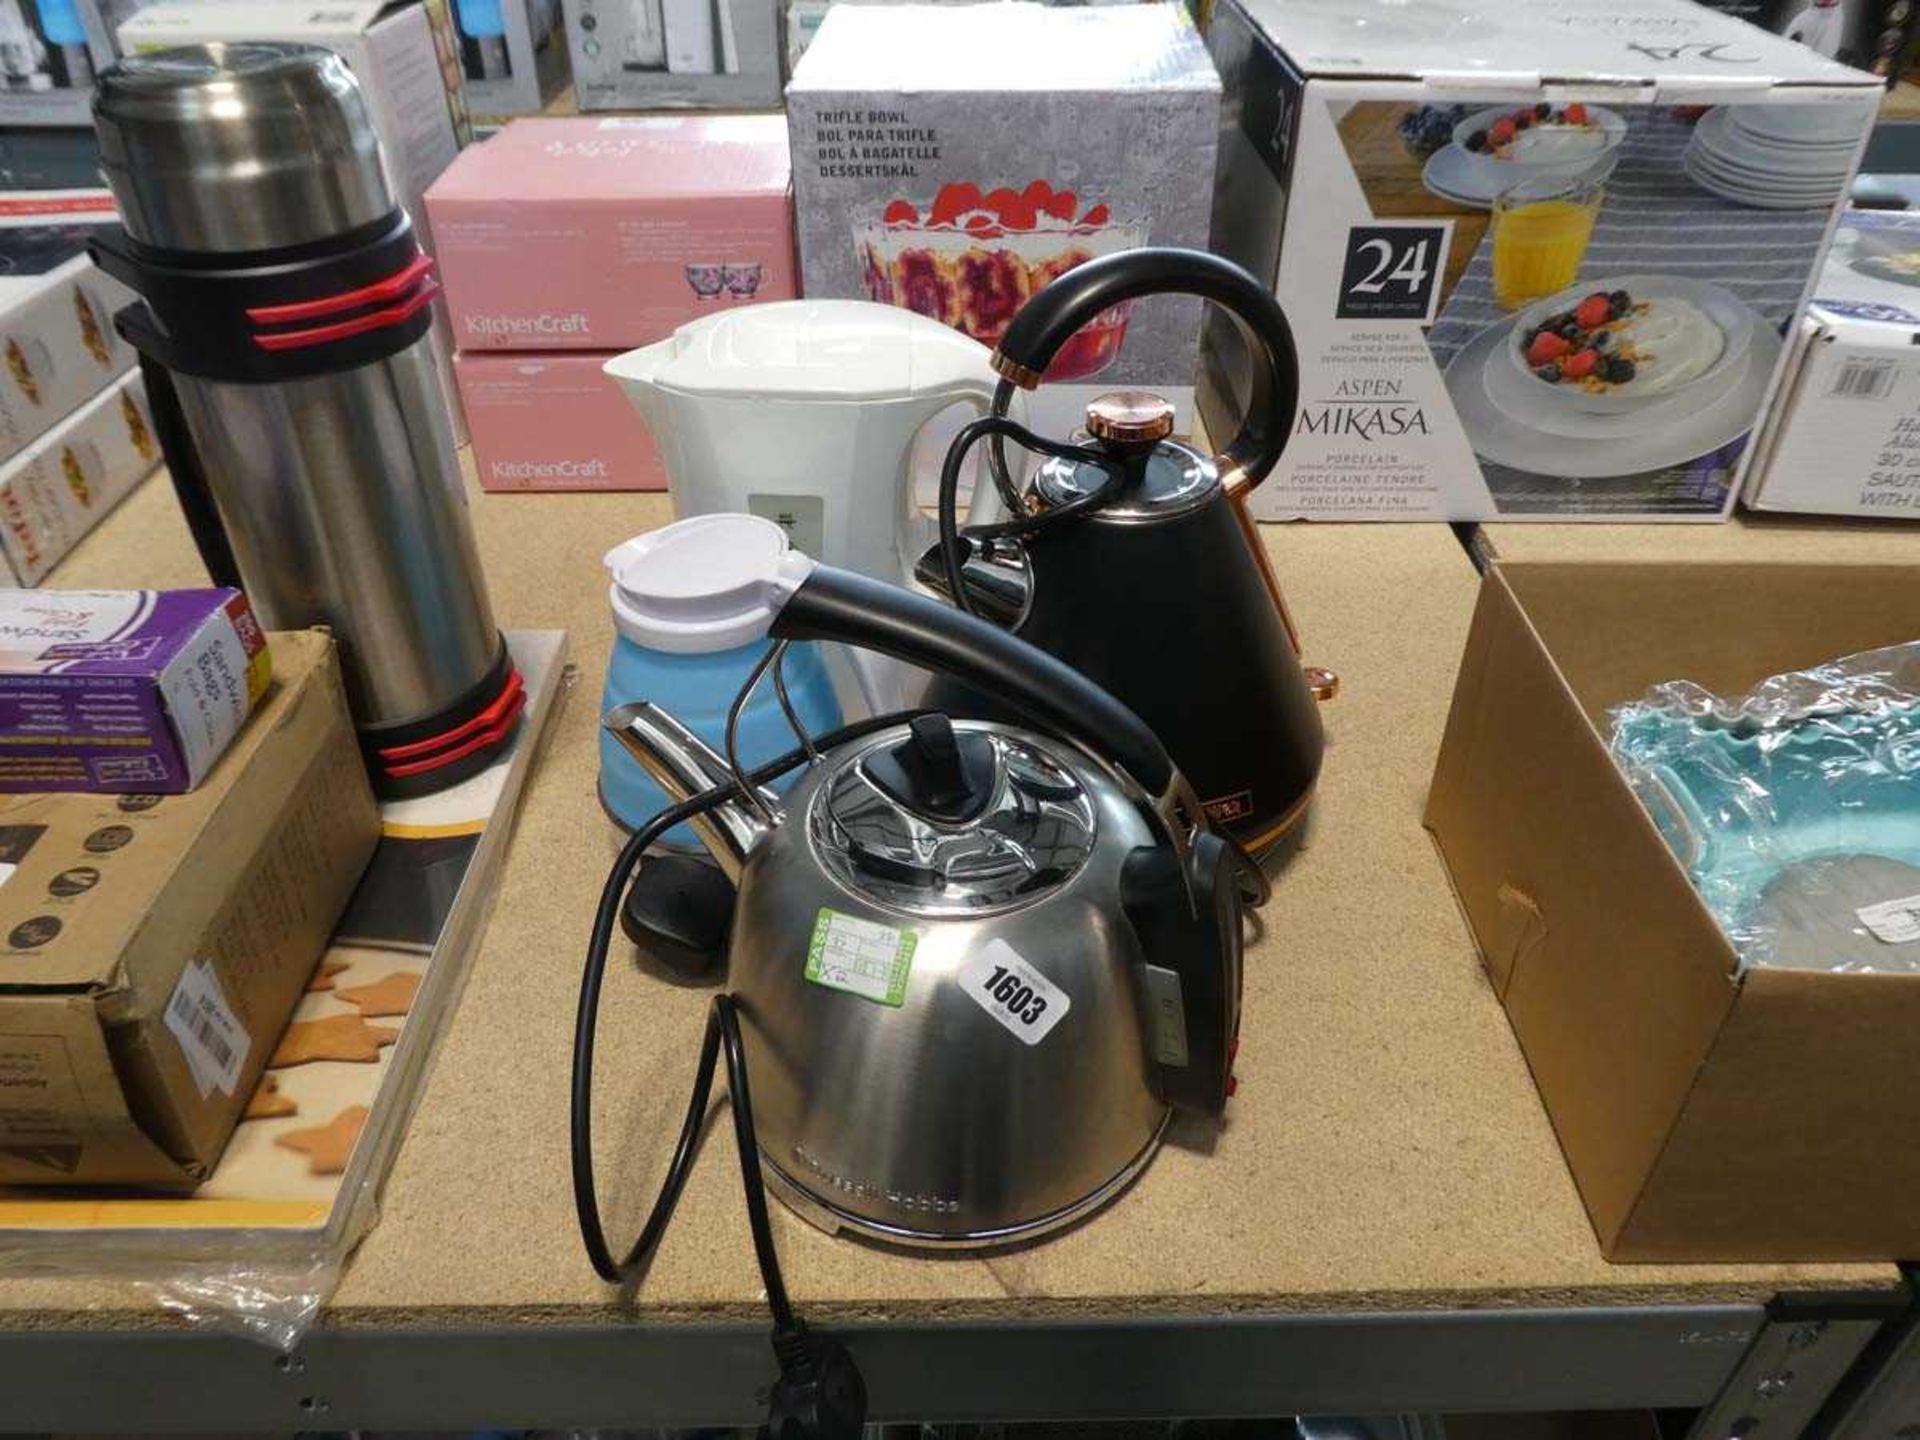 +VAT Unboxed kettles incl. Russell Hobbs, Tower, etc.